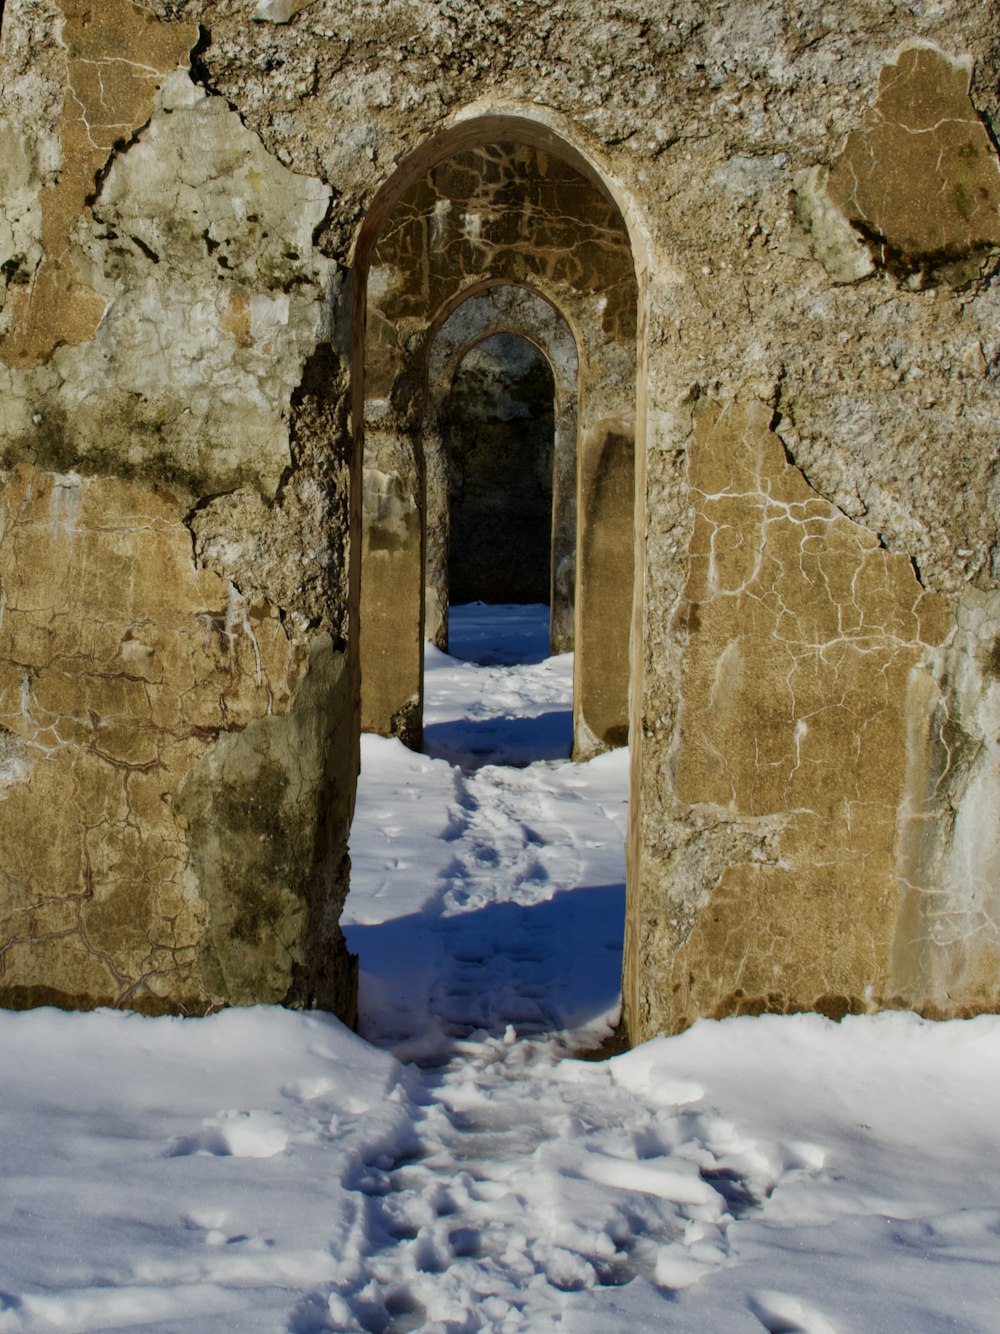 a stone wall with a doorway and snow on the ground